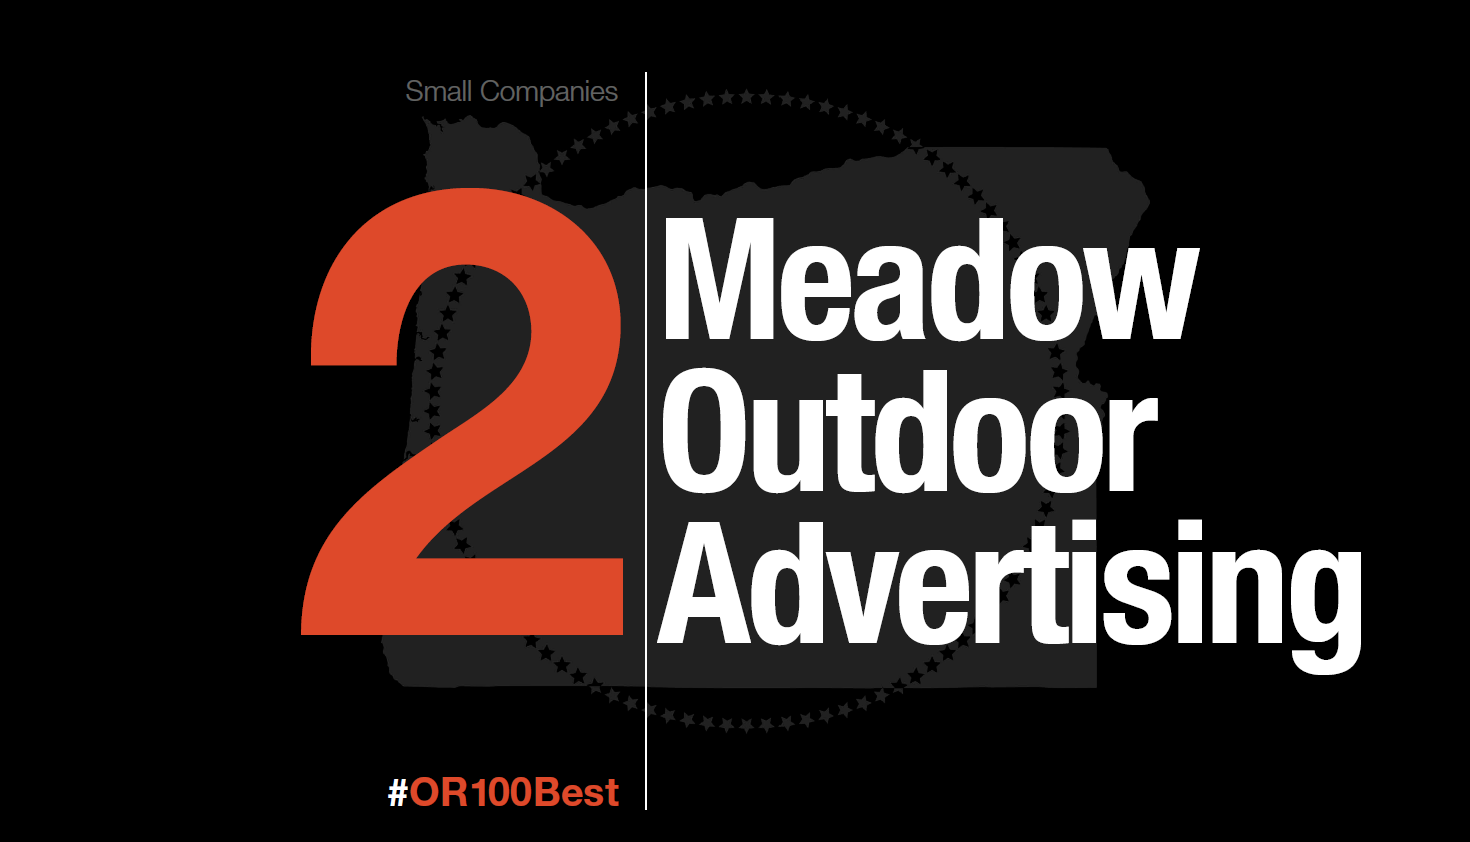 Meadow is Named the 2nd Best Small Business to Work for in Oregon